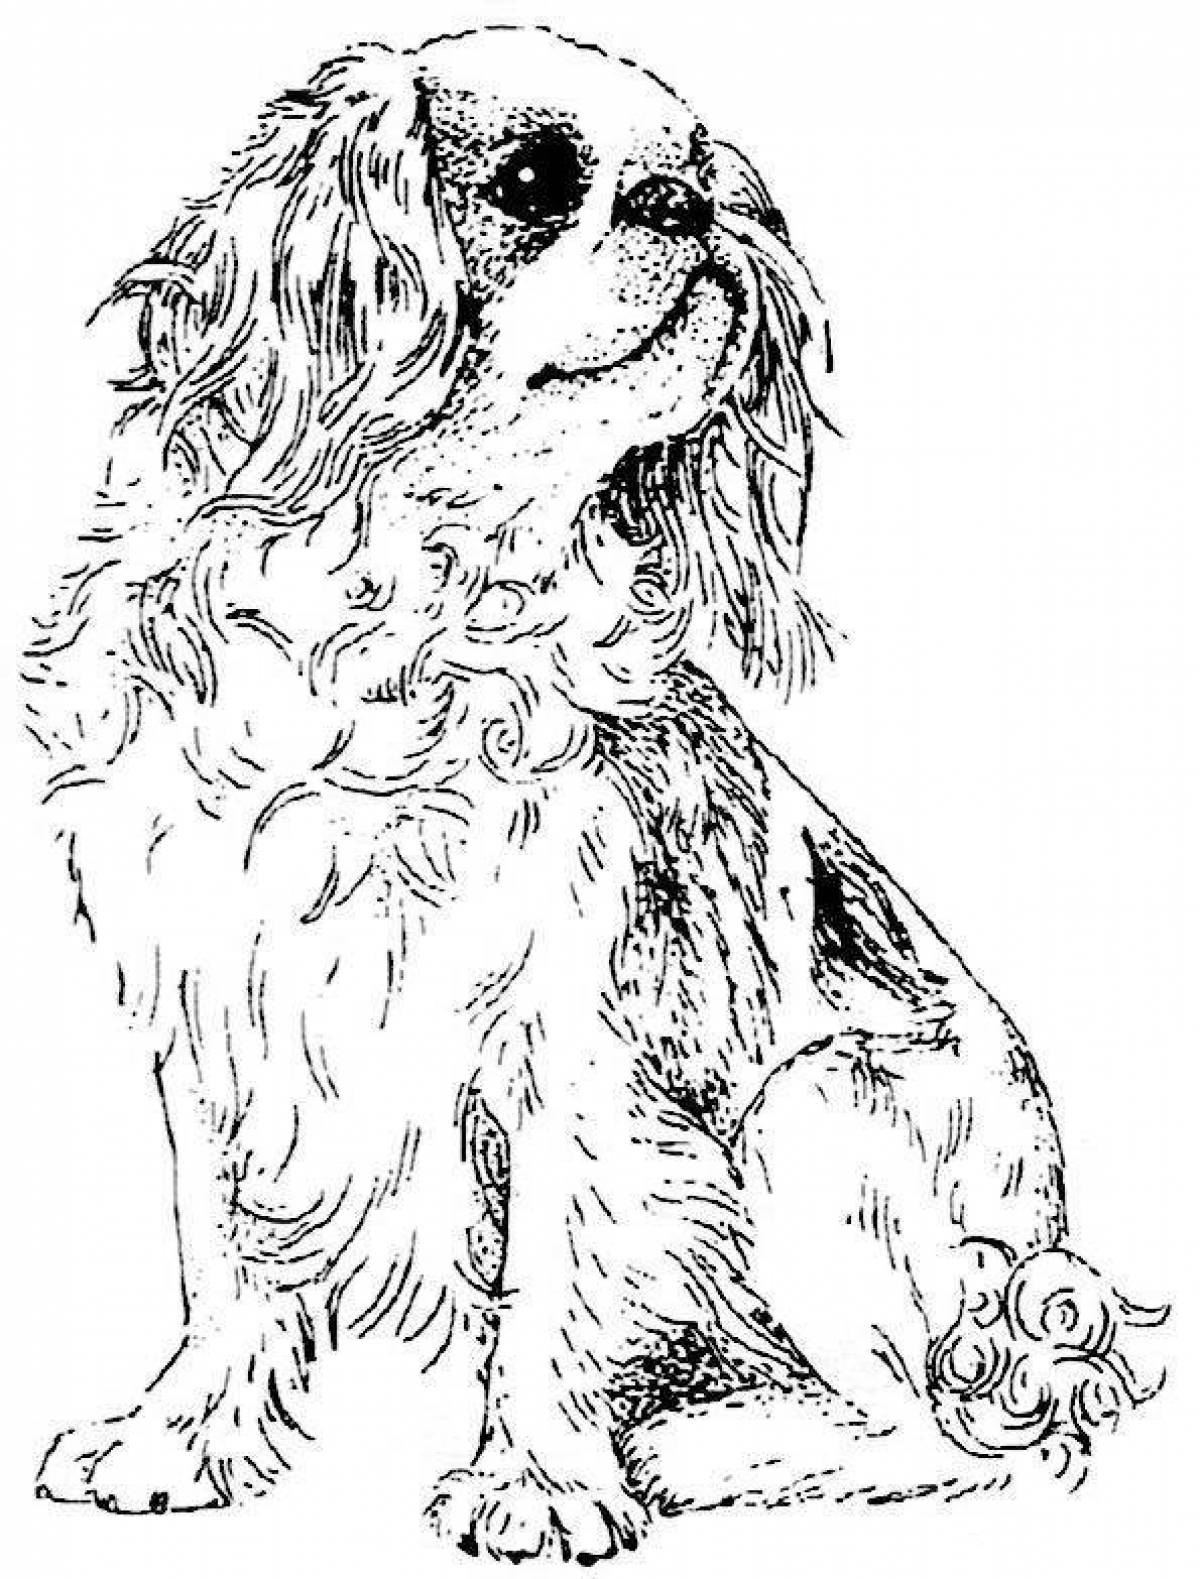 Intriguing coloring of a spaniel